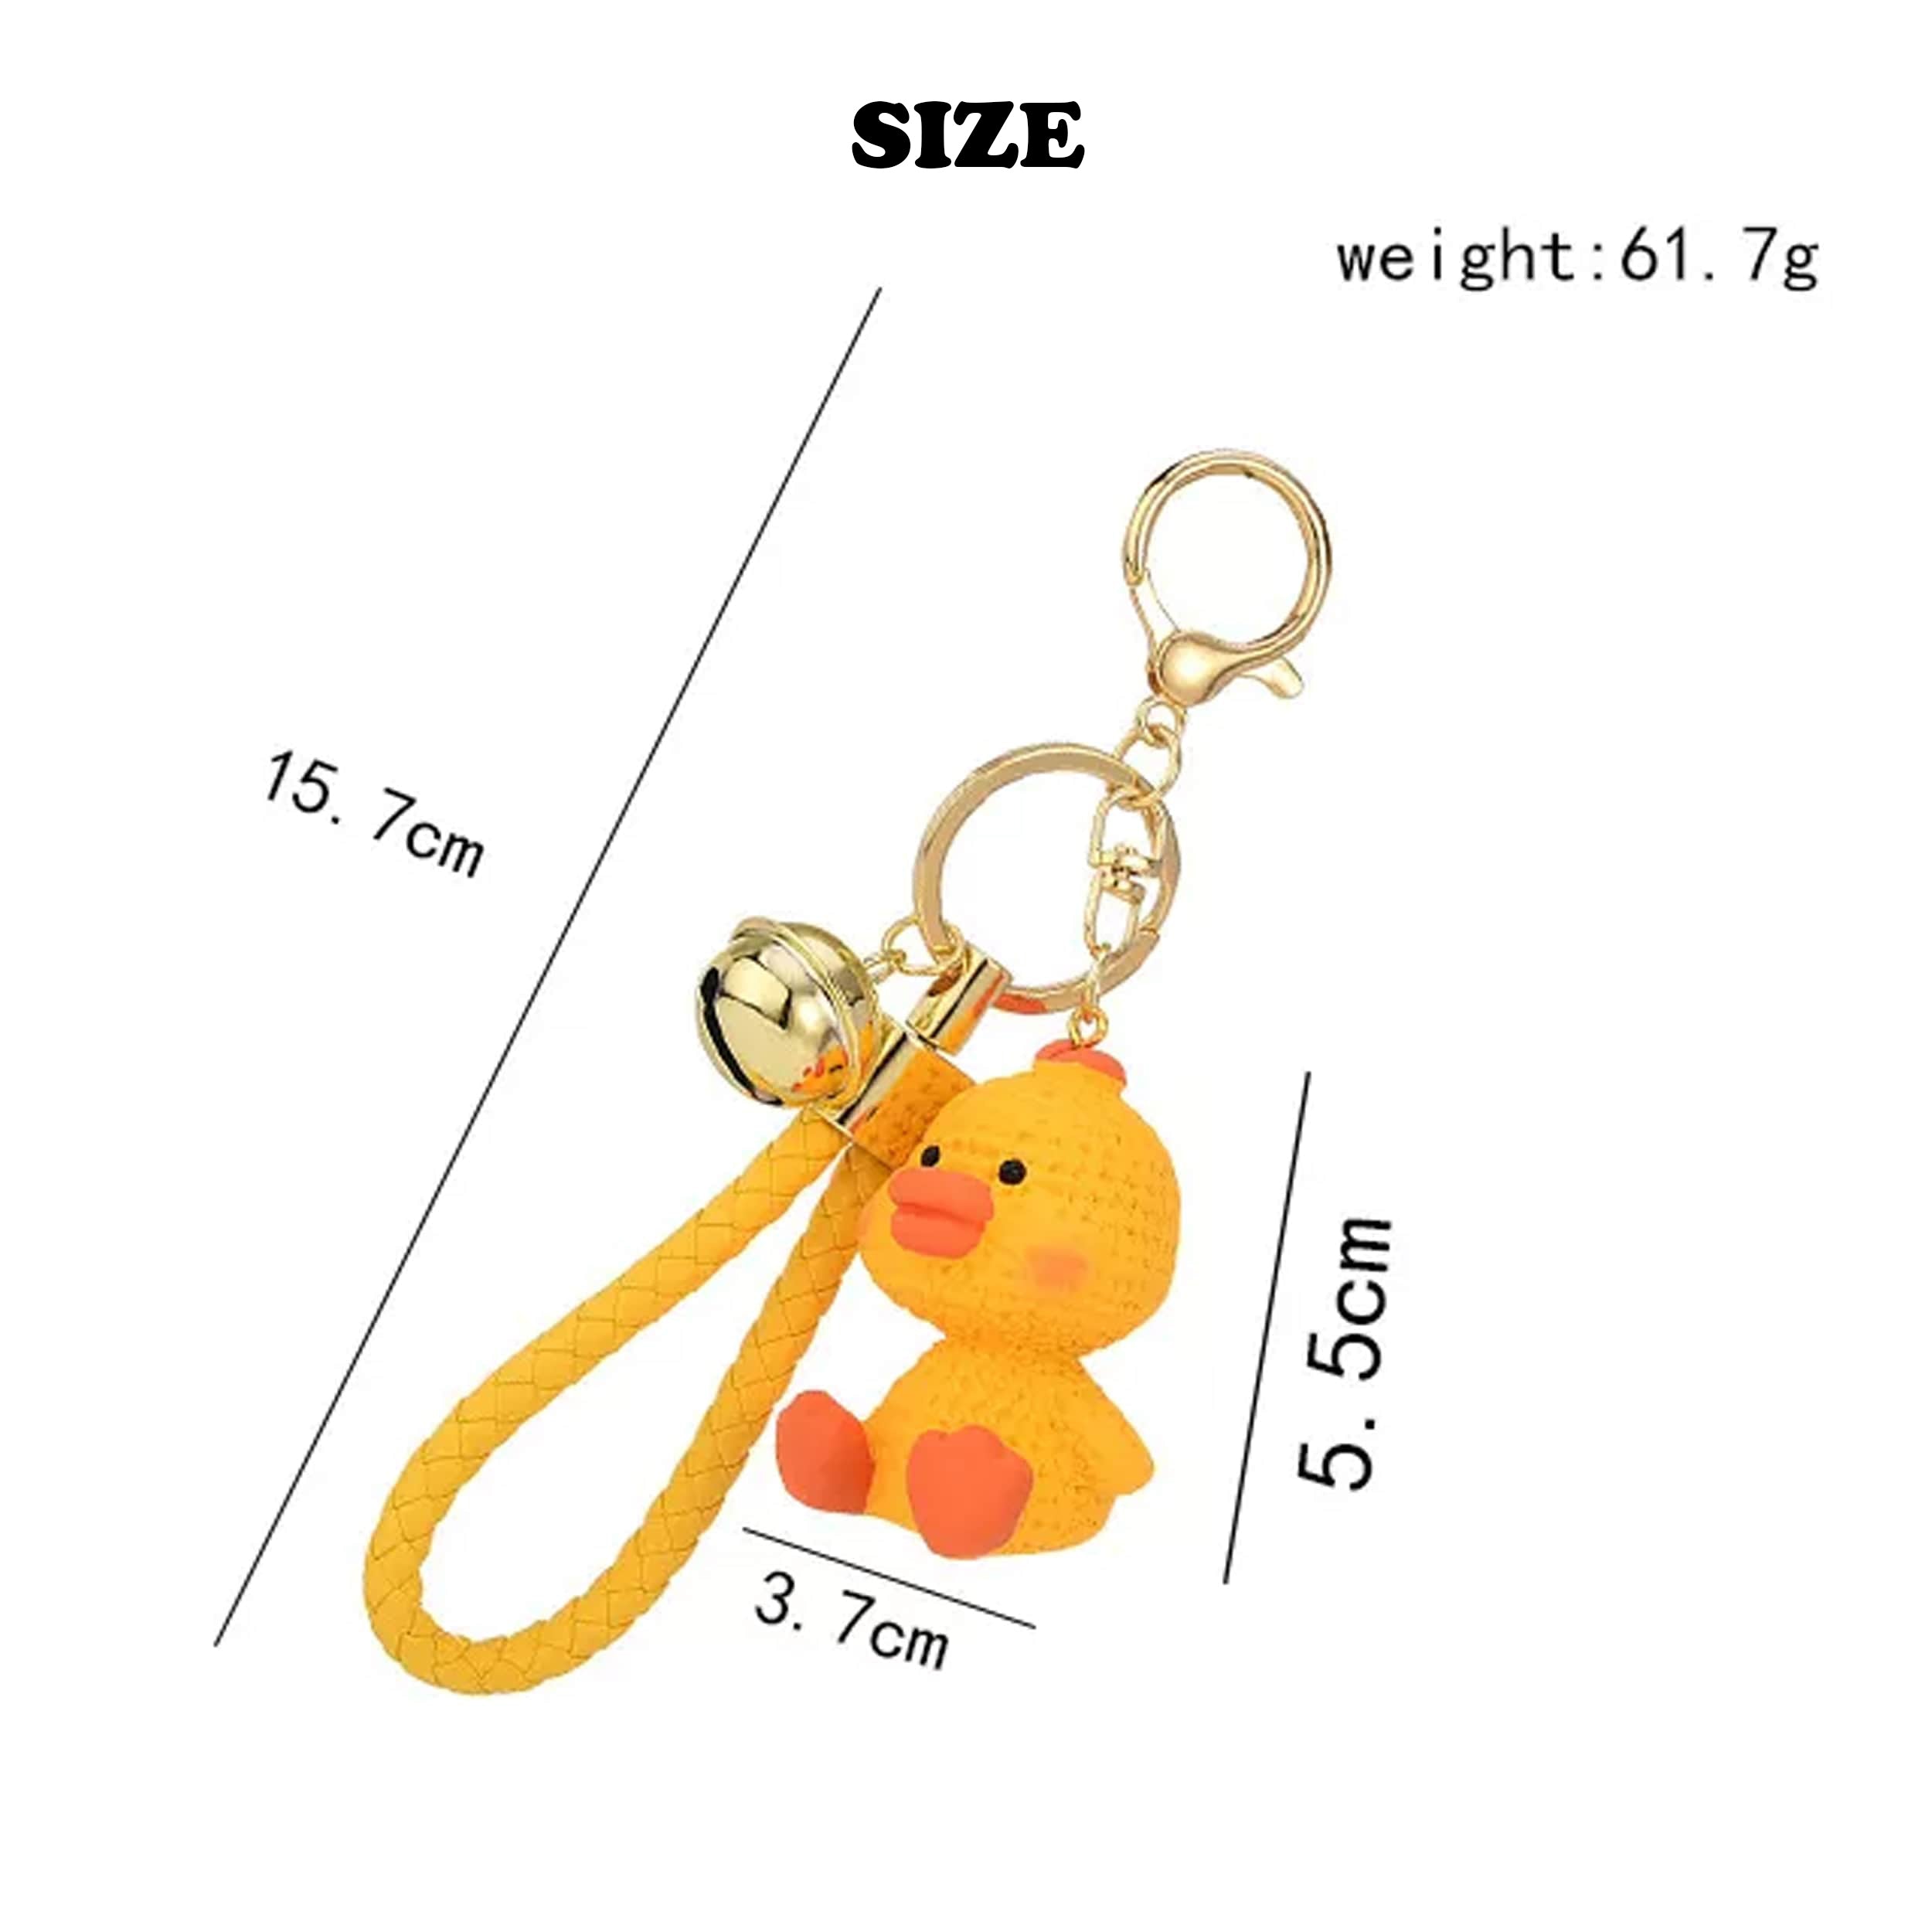 3D Shaped Animals Keychains